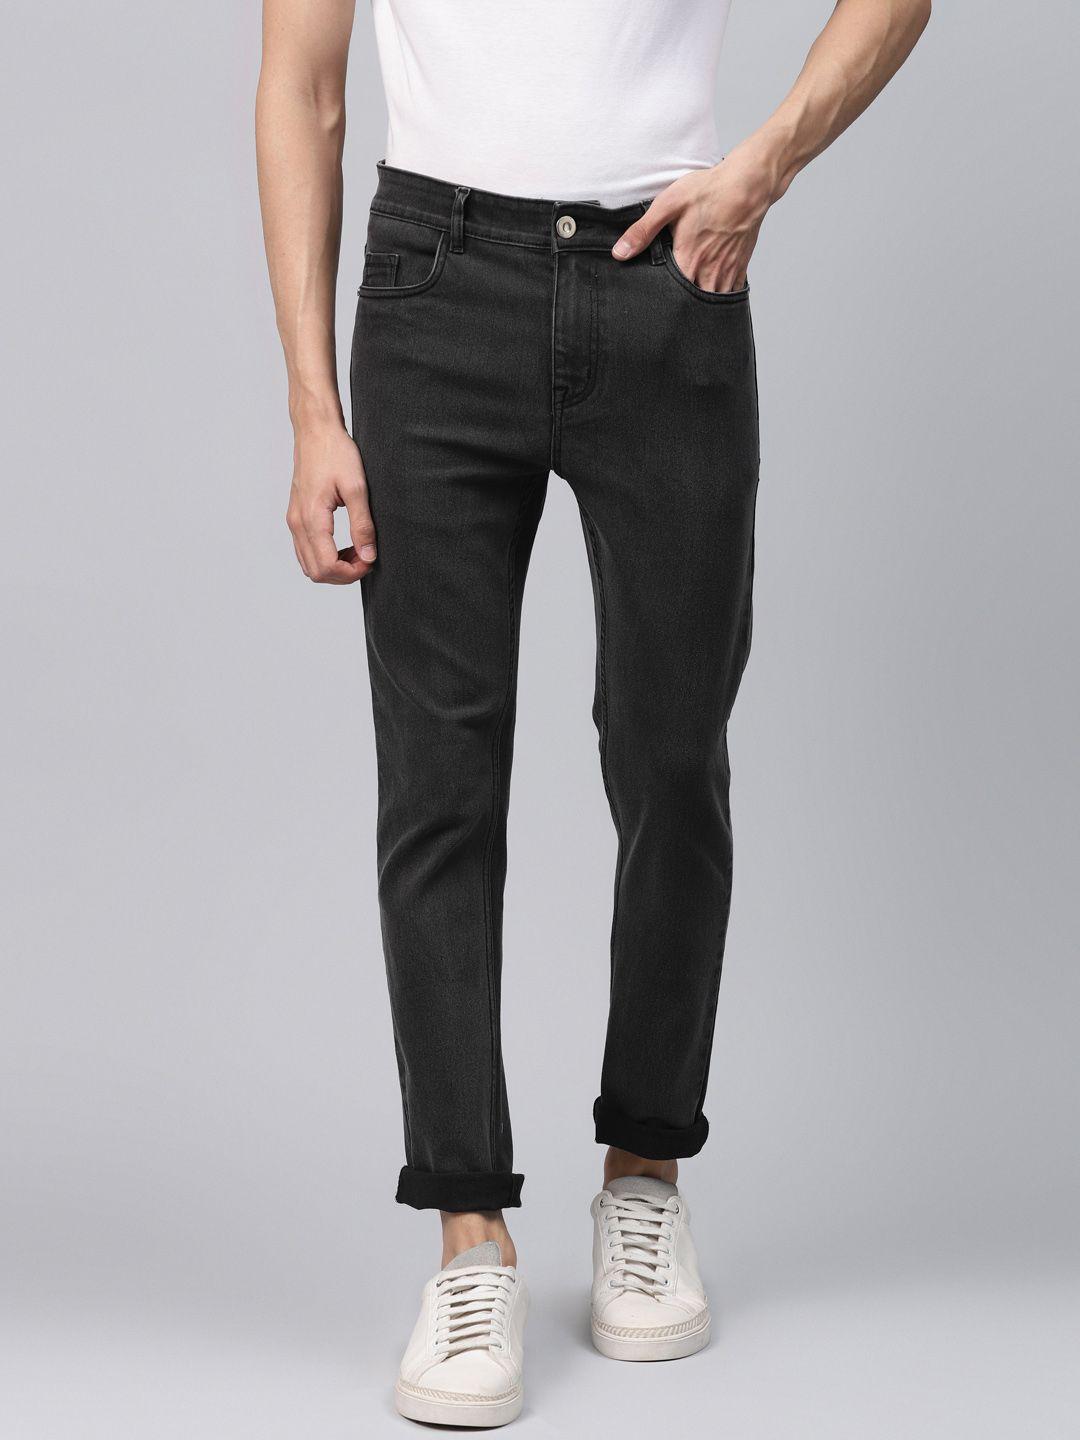 hubberholme-men-charcoal-grey-slim-fit-mid-rise-clean-look-stretchable-jeans